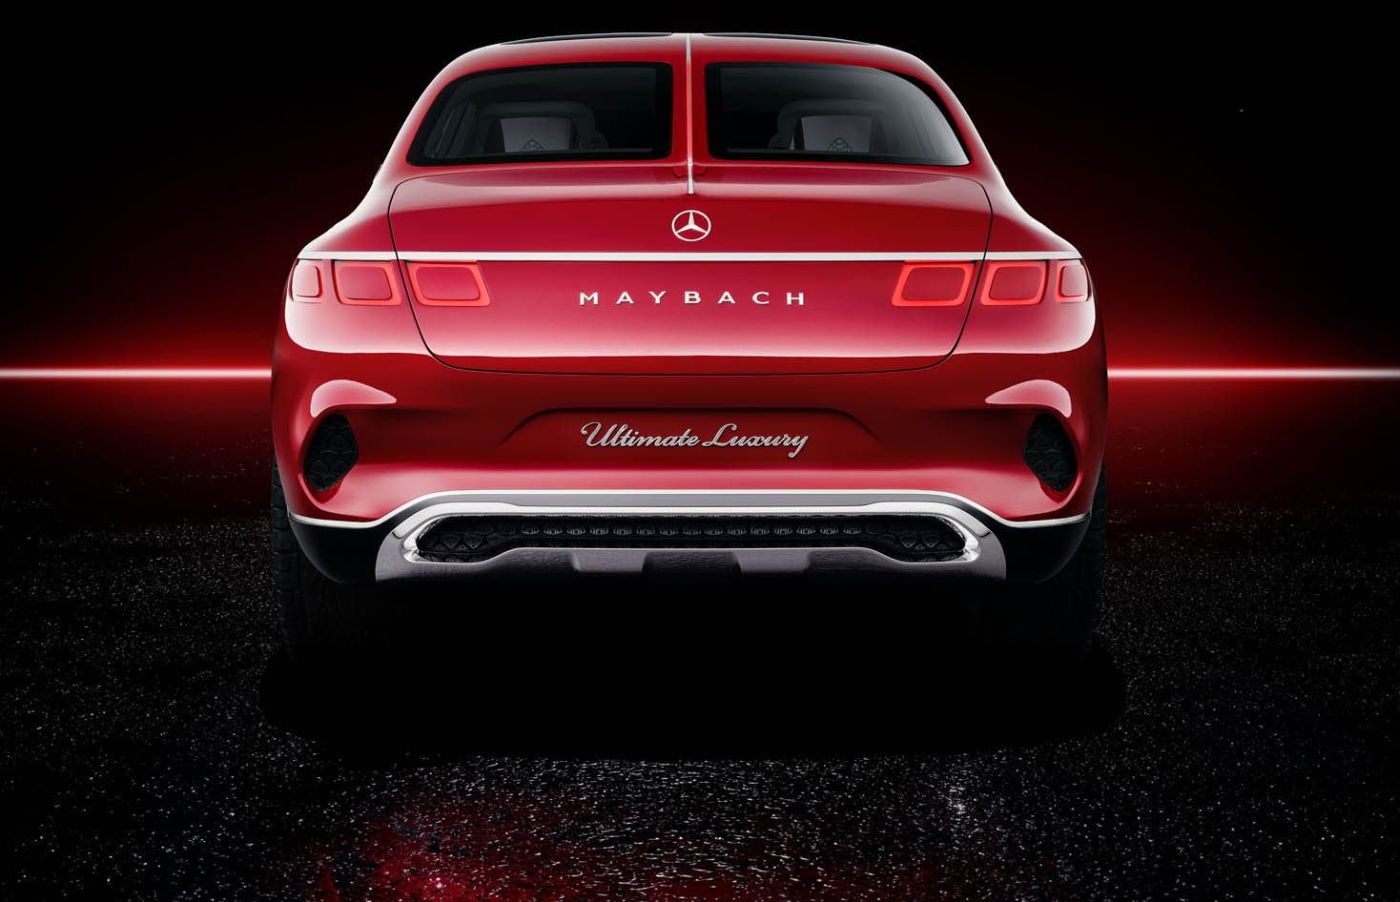 Vision-Mercedes-Maybach-Ultimate-Luxury-04